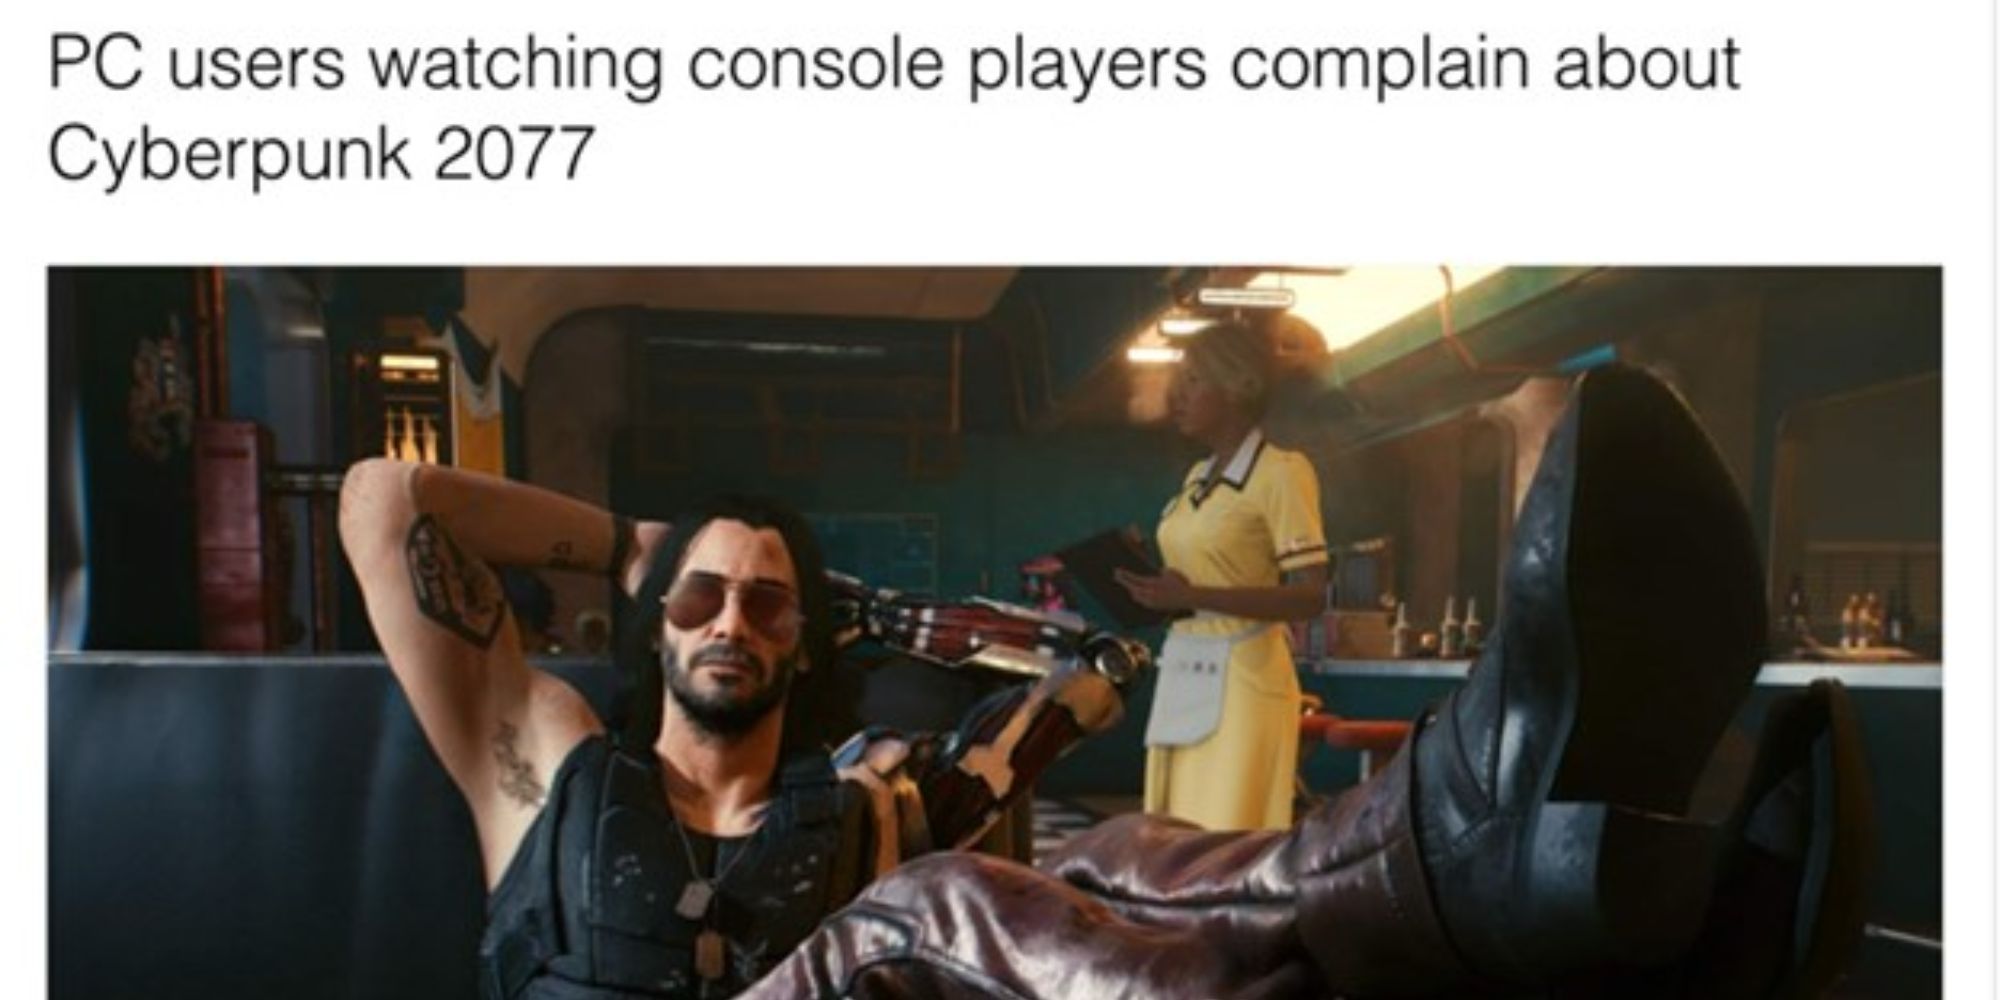 Johnny Silverhand as a pc player mocking console players.